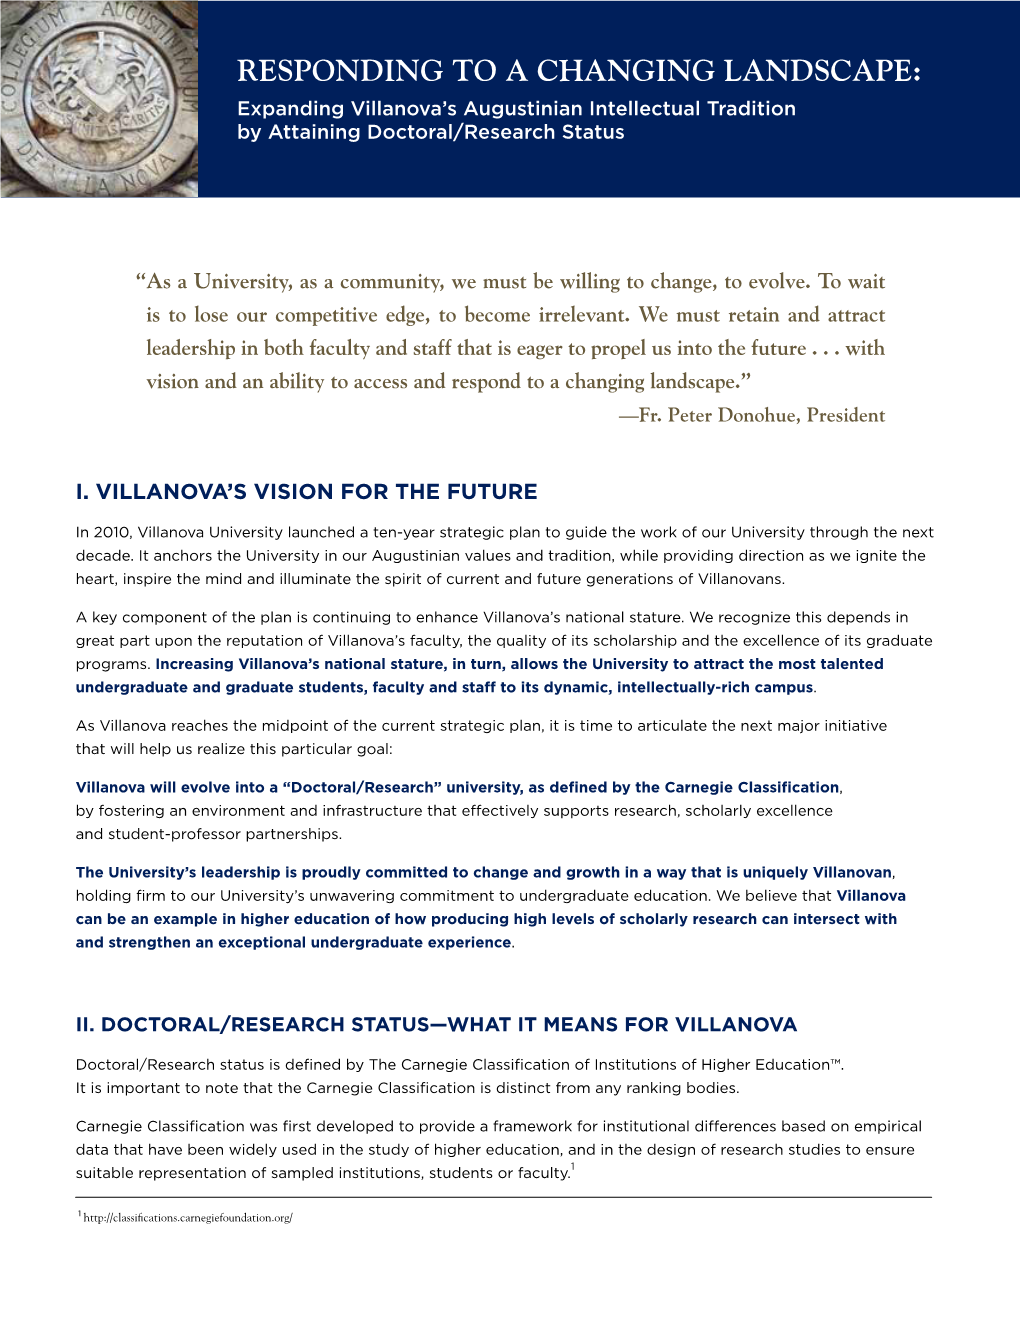 RESPONDING to a CHANGING LANDSCAPE: Expanding Villanova’S Augustinian Intellectual Tradition by Attaining Doctoral/Research Status